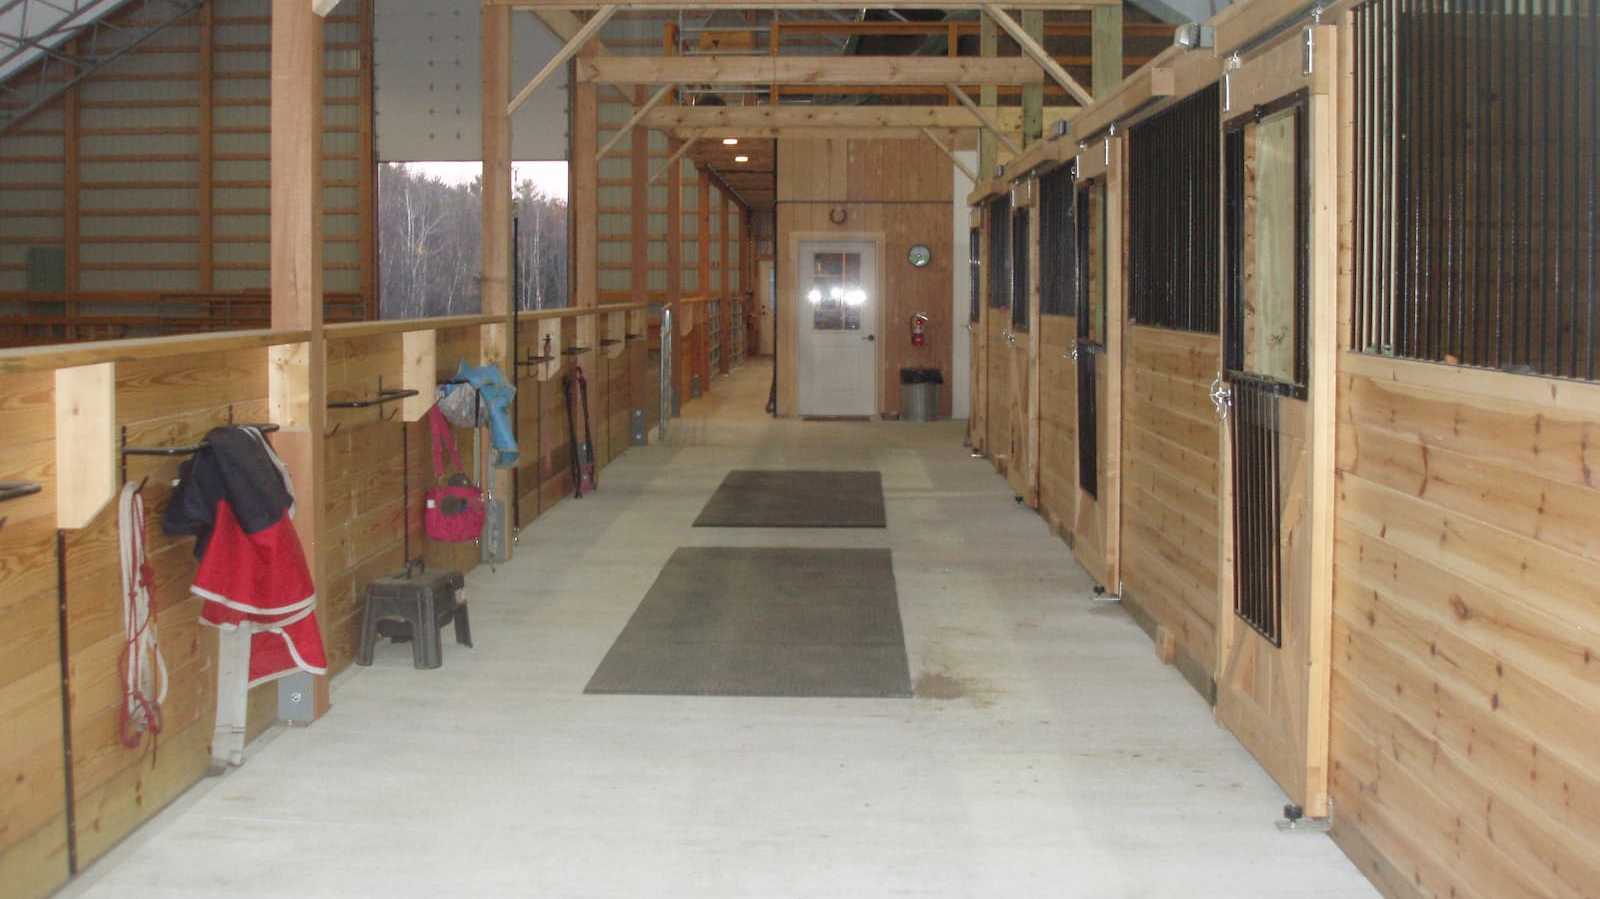 Interior of a 85’ x 120’ fabric roof riding arena.